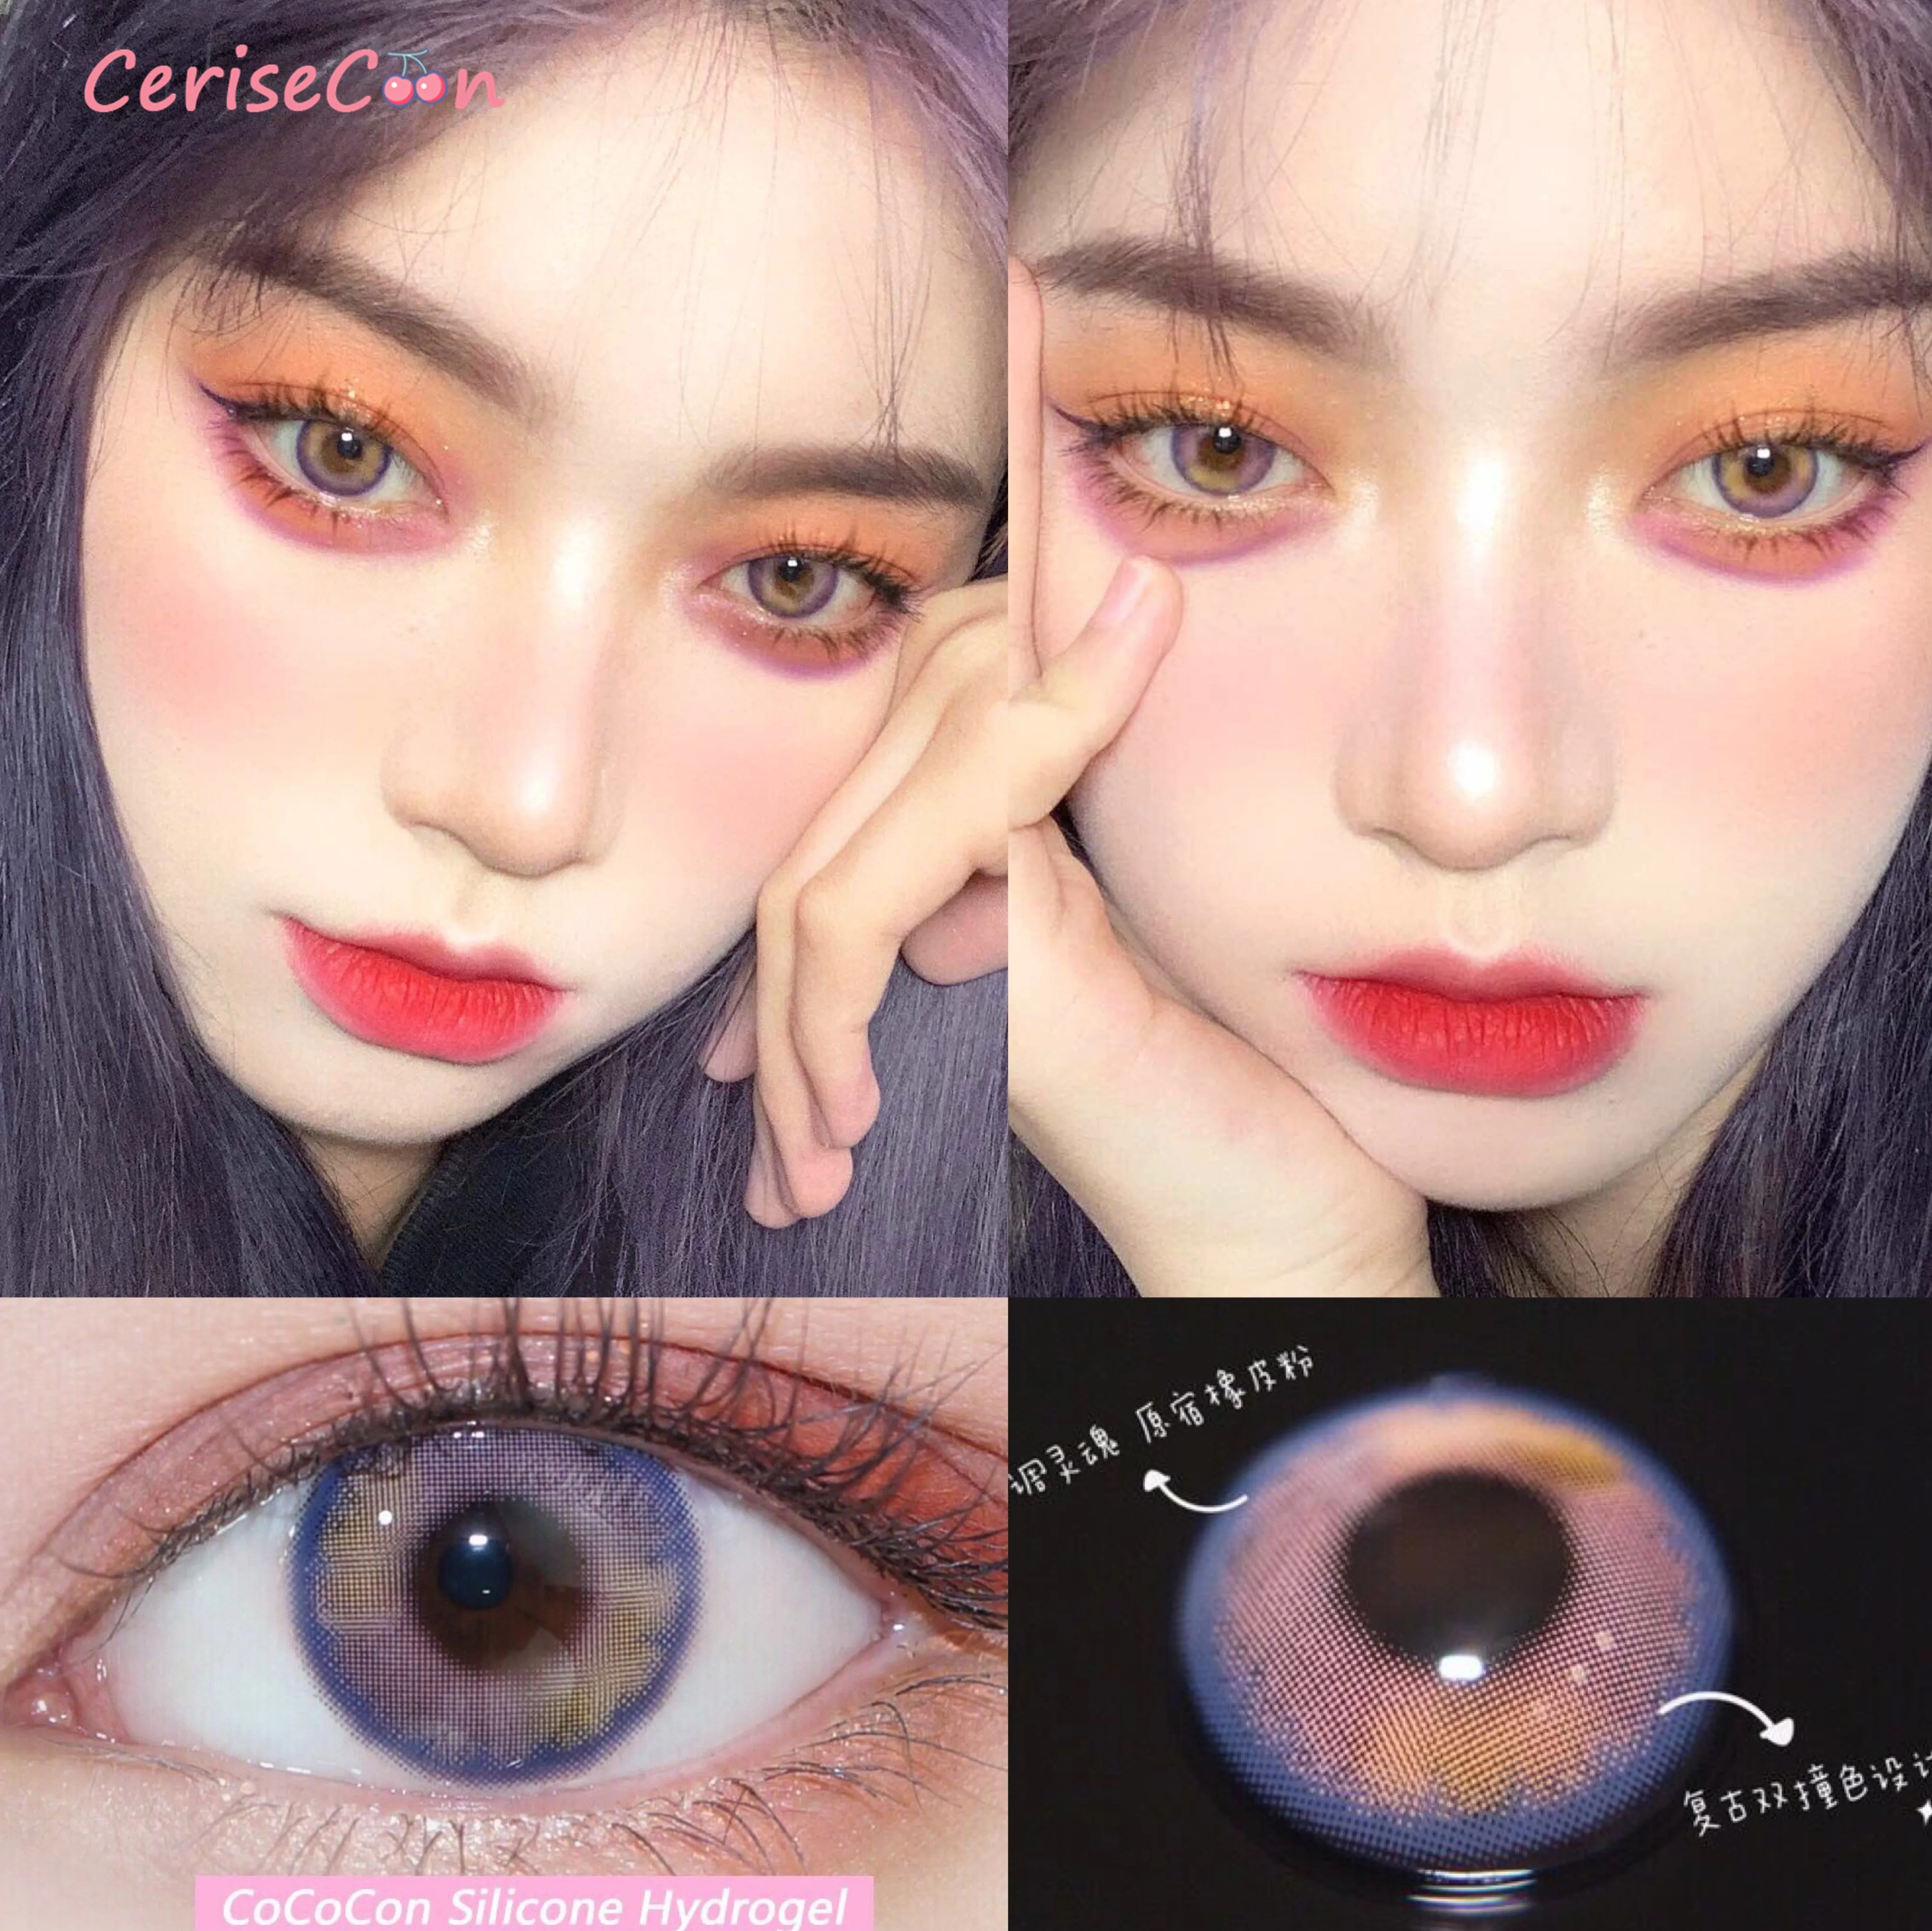 

Cerisecon naked pink Colored Contact Lenses Cosmetic small big beautiful pupil lens for Eyes yearly Myopia prescription degrees